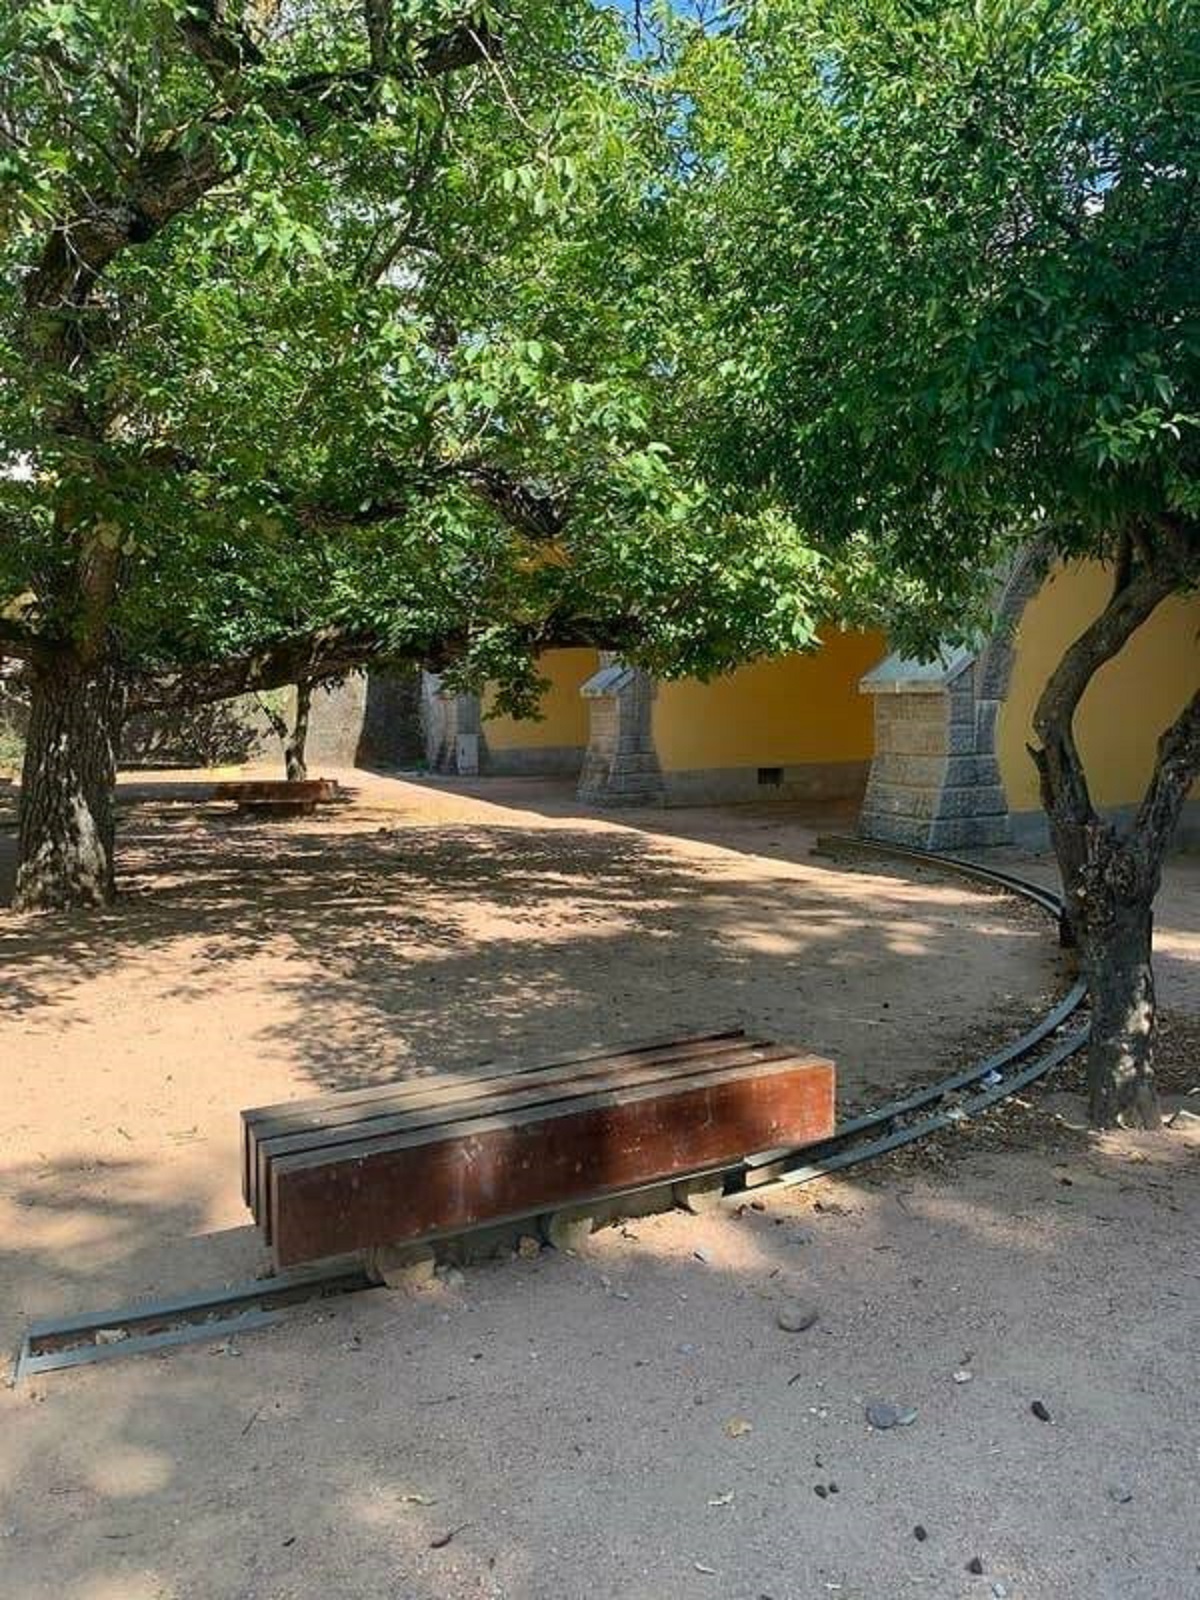 This park has its benches on rails so you can always find shade: